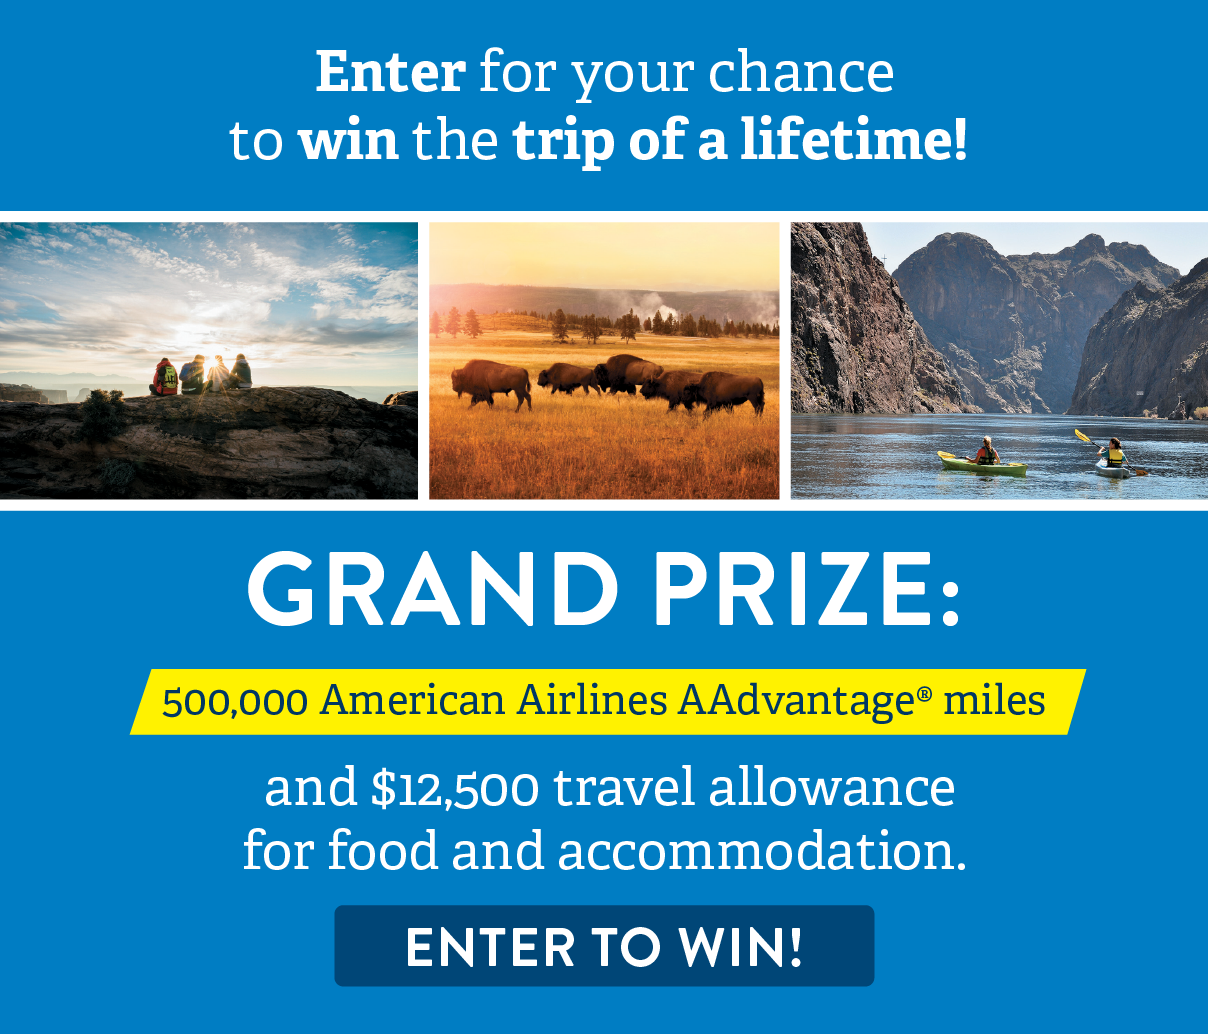 A blue lightbox. Text at the top reads "Enter for your chance to win the trip of a lifetime!" Bottom text reads "Grand Prize: 500,000 American Airlines AAdvantage miles and $12,500 travel allowance for food and accommodation. Enter to win!"